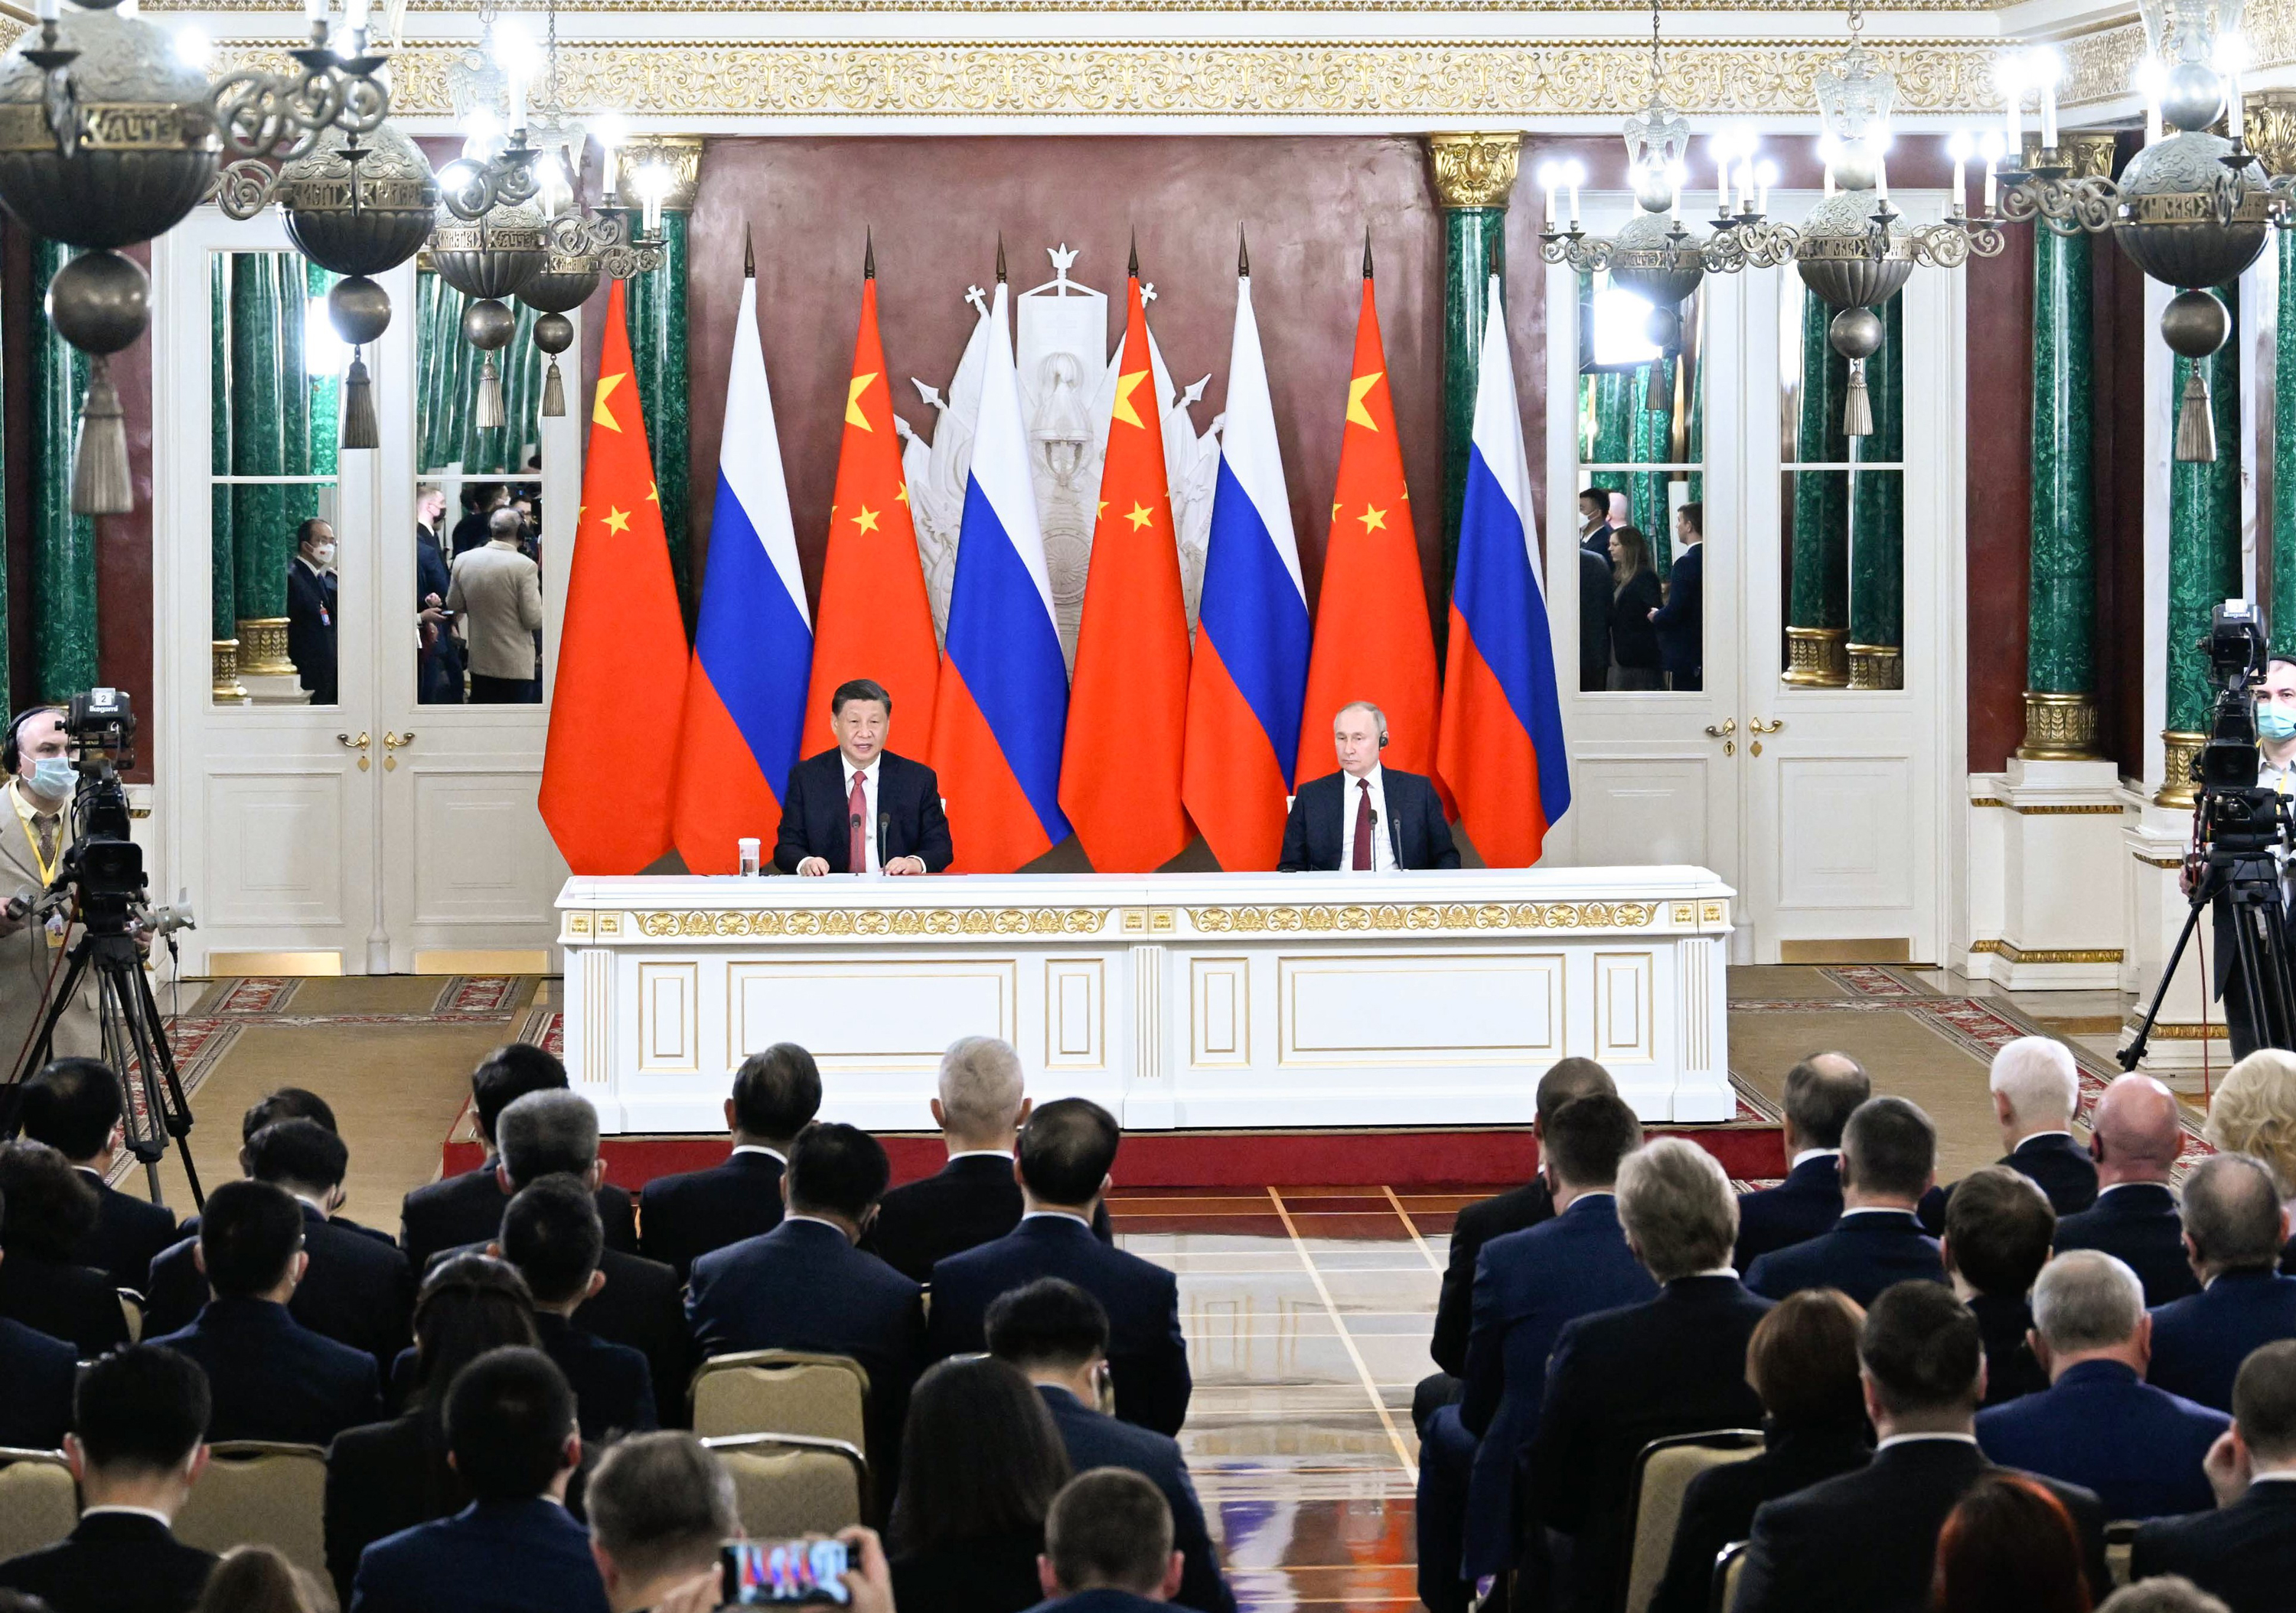 Chinese President Xi Jinping and Russian President Vladimir Putin meet the press after their talks at the Kremlin in Moscow, Russia on March 21.